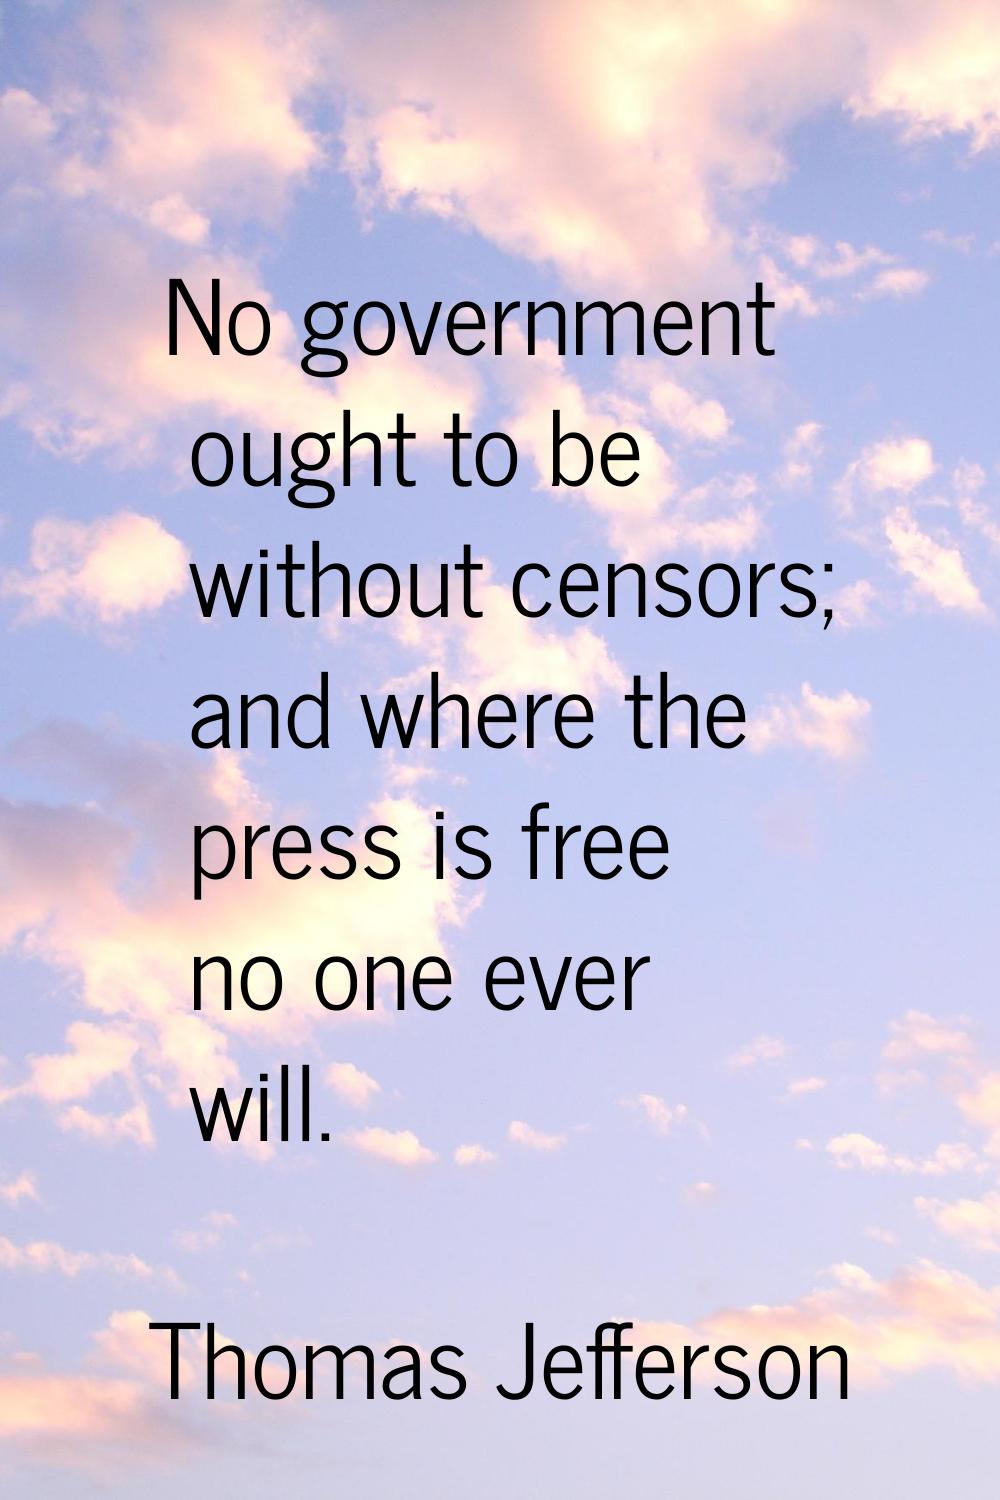 No government ought to be without censors; and where the press is free no one ever will.